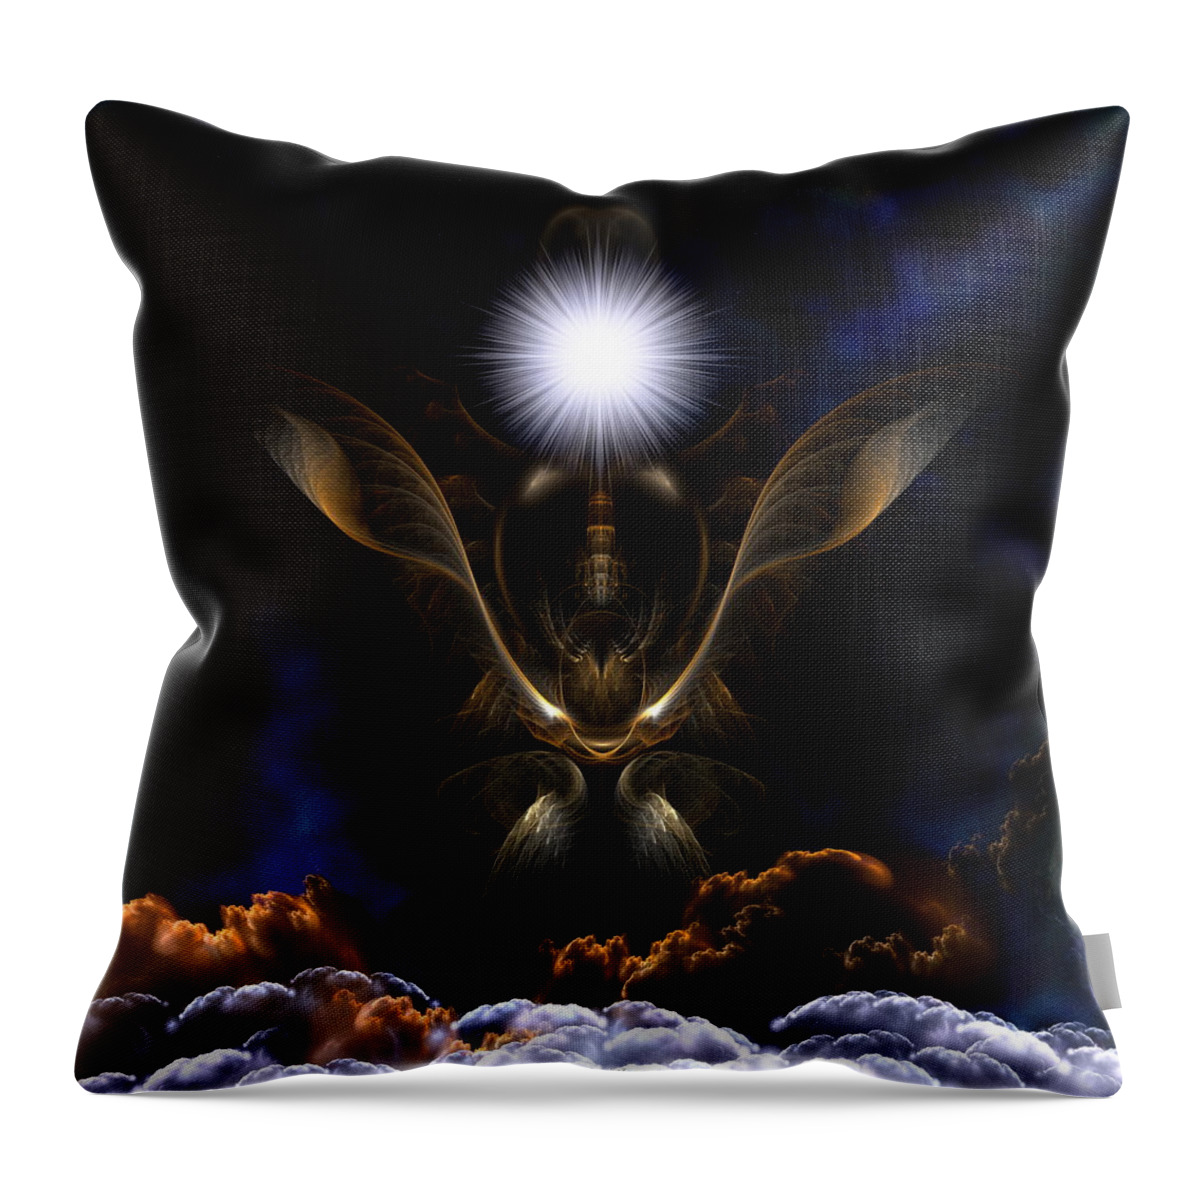 Tower In The Bottle Throw Pillow featuring the digital art The Tower In The Bottle Takes Flight by Rolando Burbon